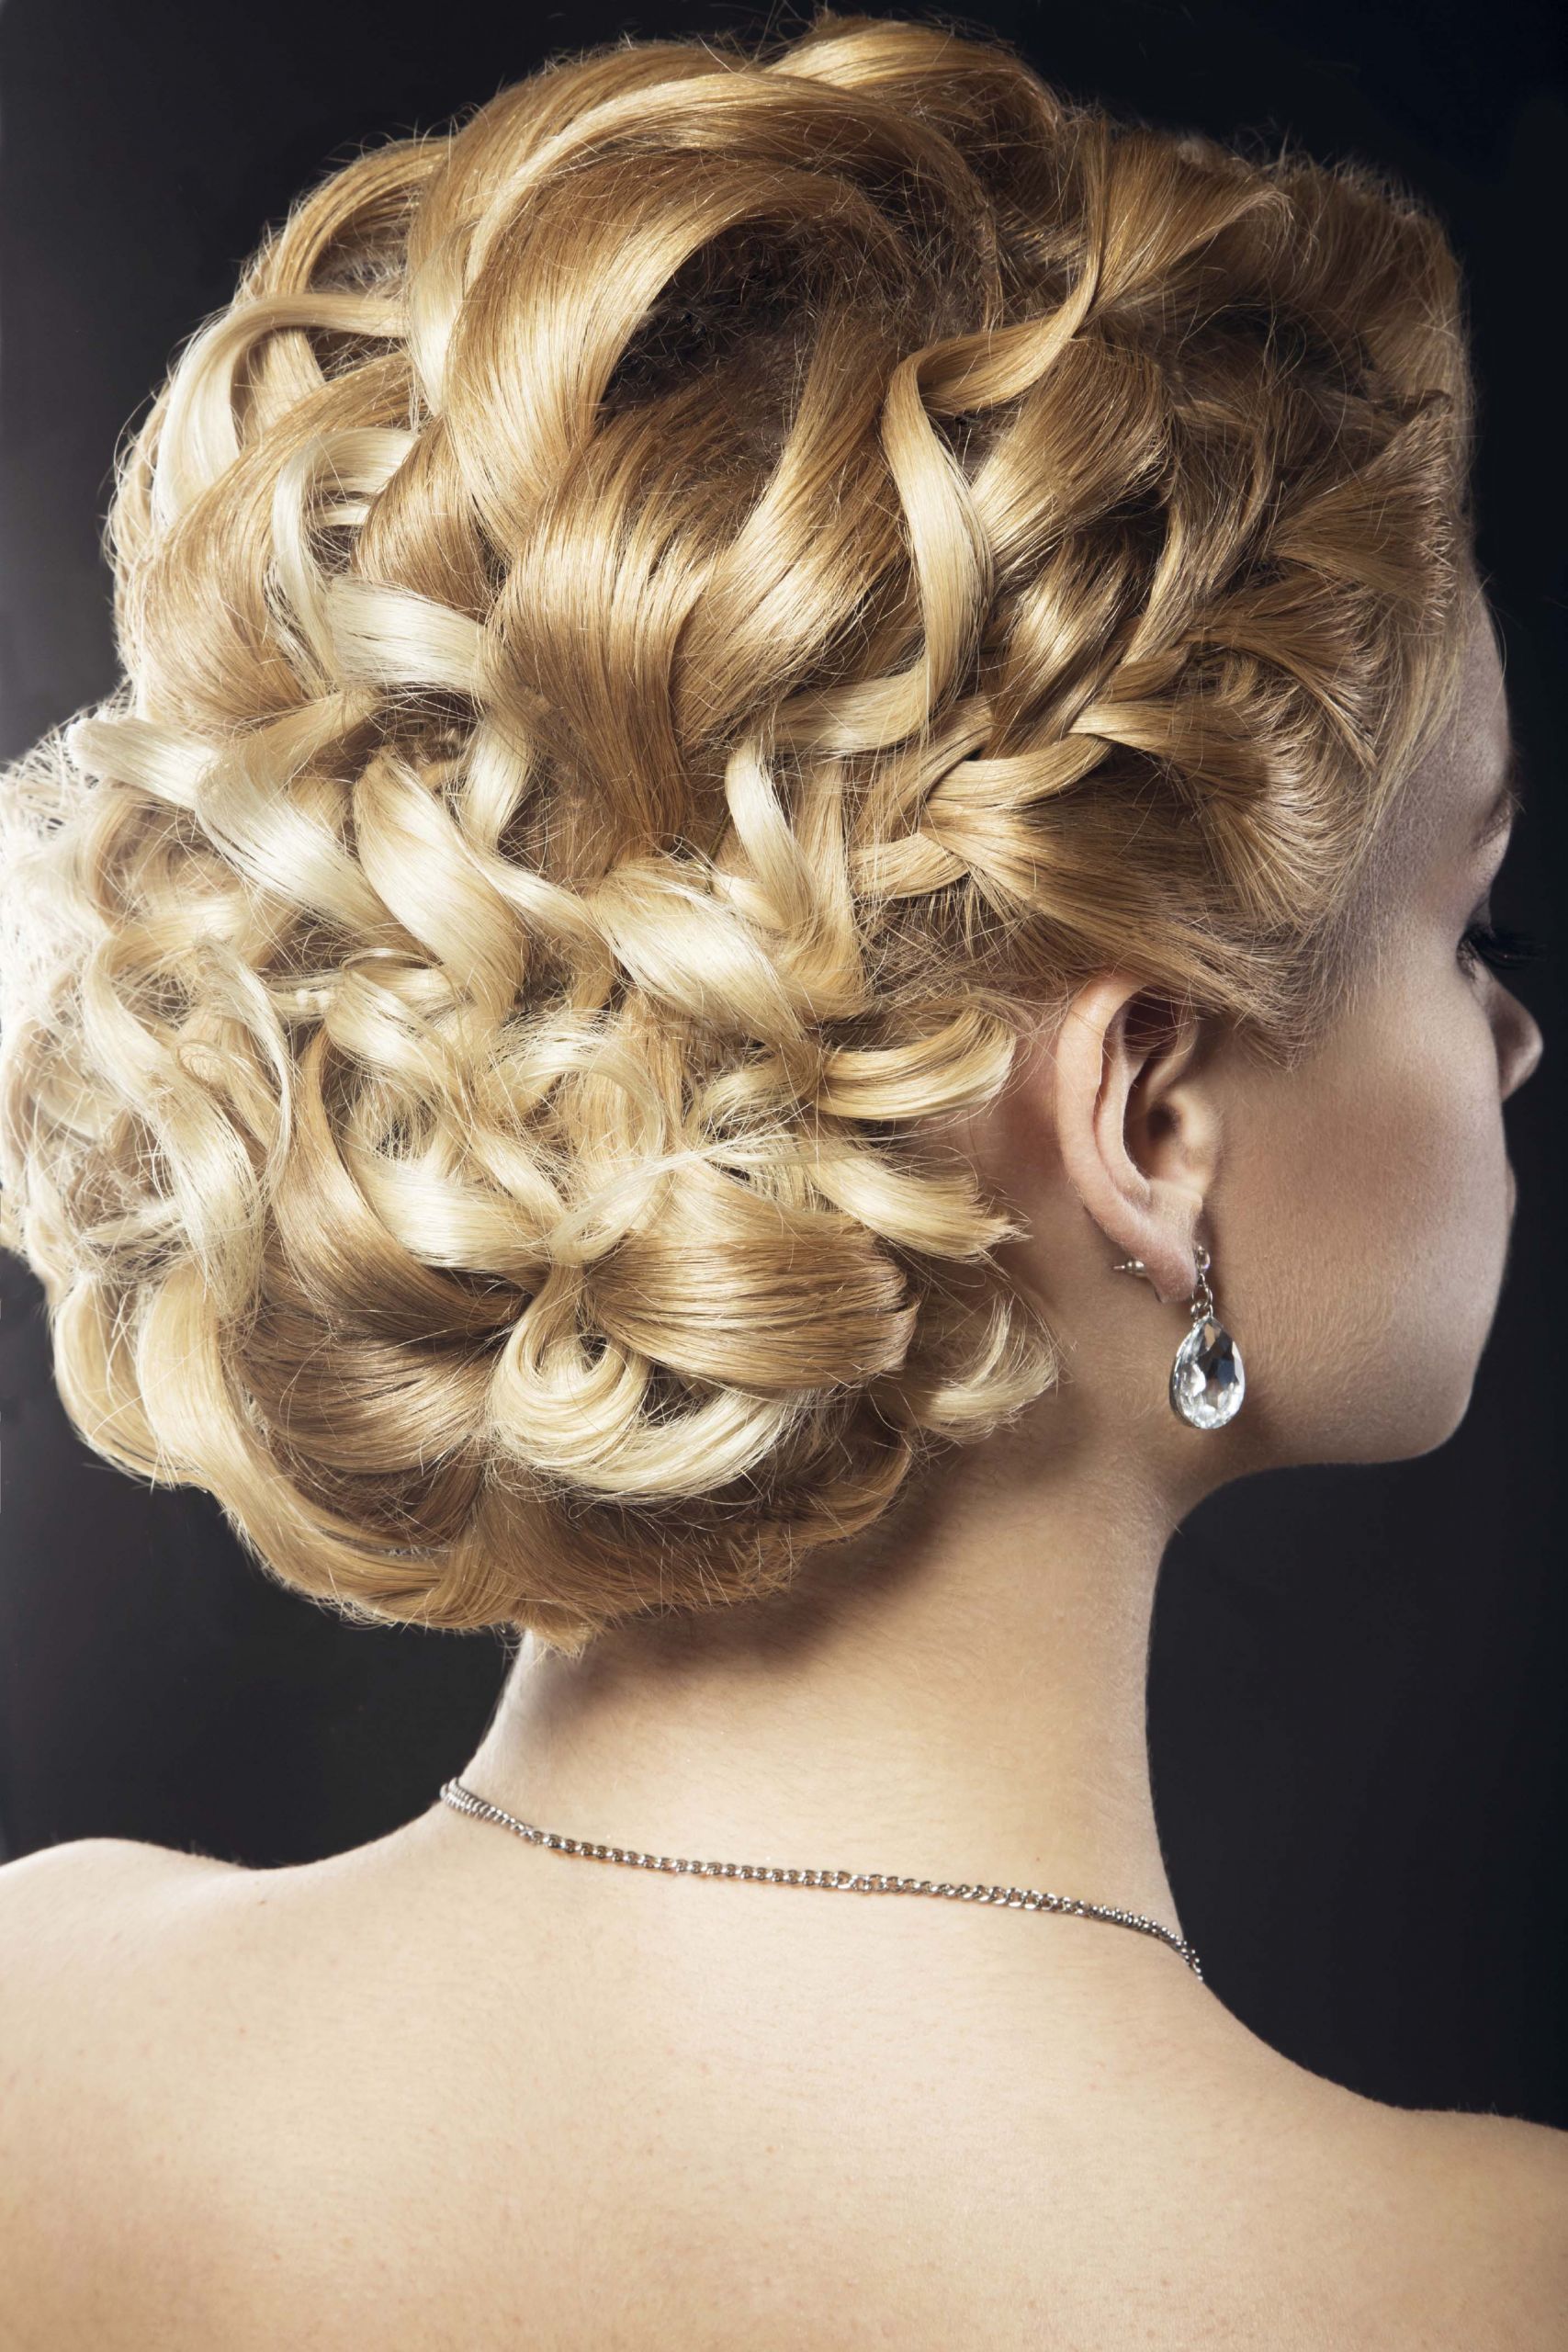 Updo Hairstyles For Bridesmaid
 9 Spring Wedding Updos for Curly Hair